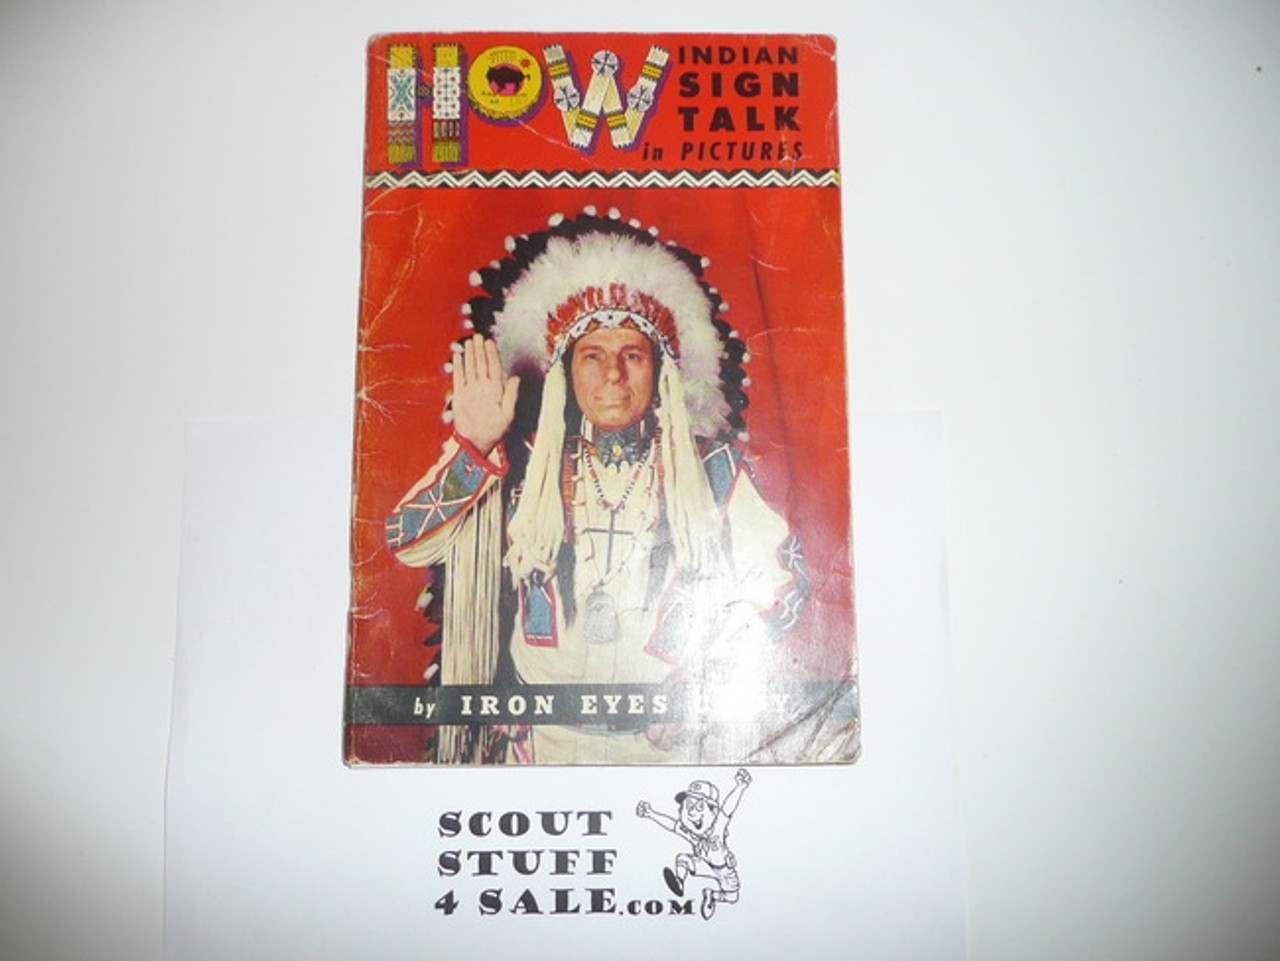 1952 How Indians Sign Talk in Pictures, By Iron Eyes Cody, Signed By Iron Eyes